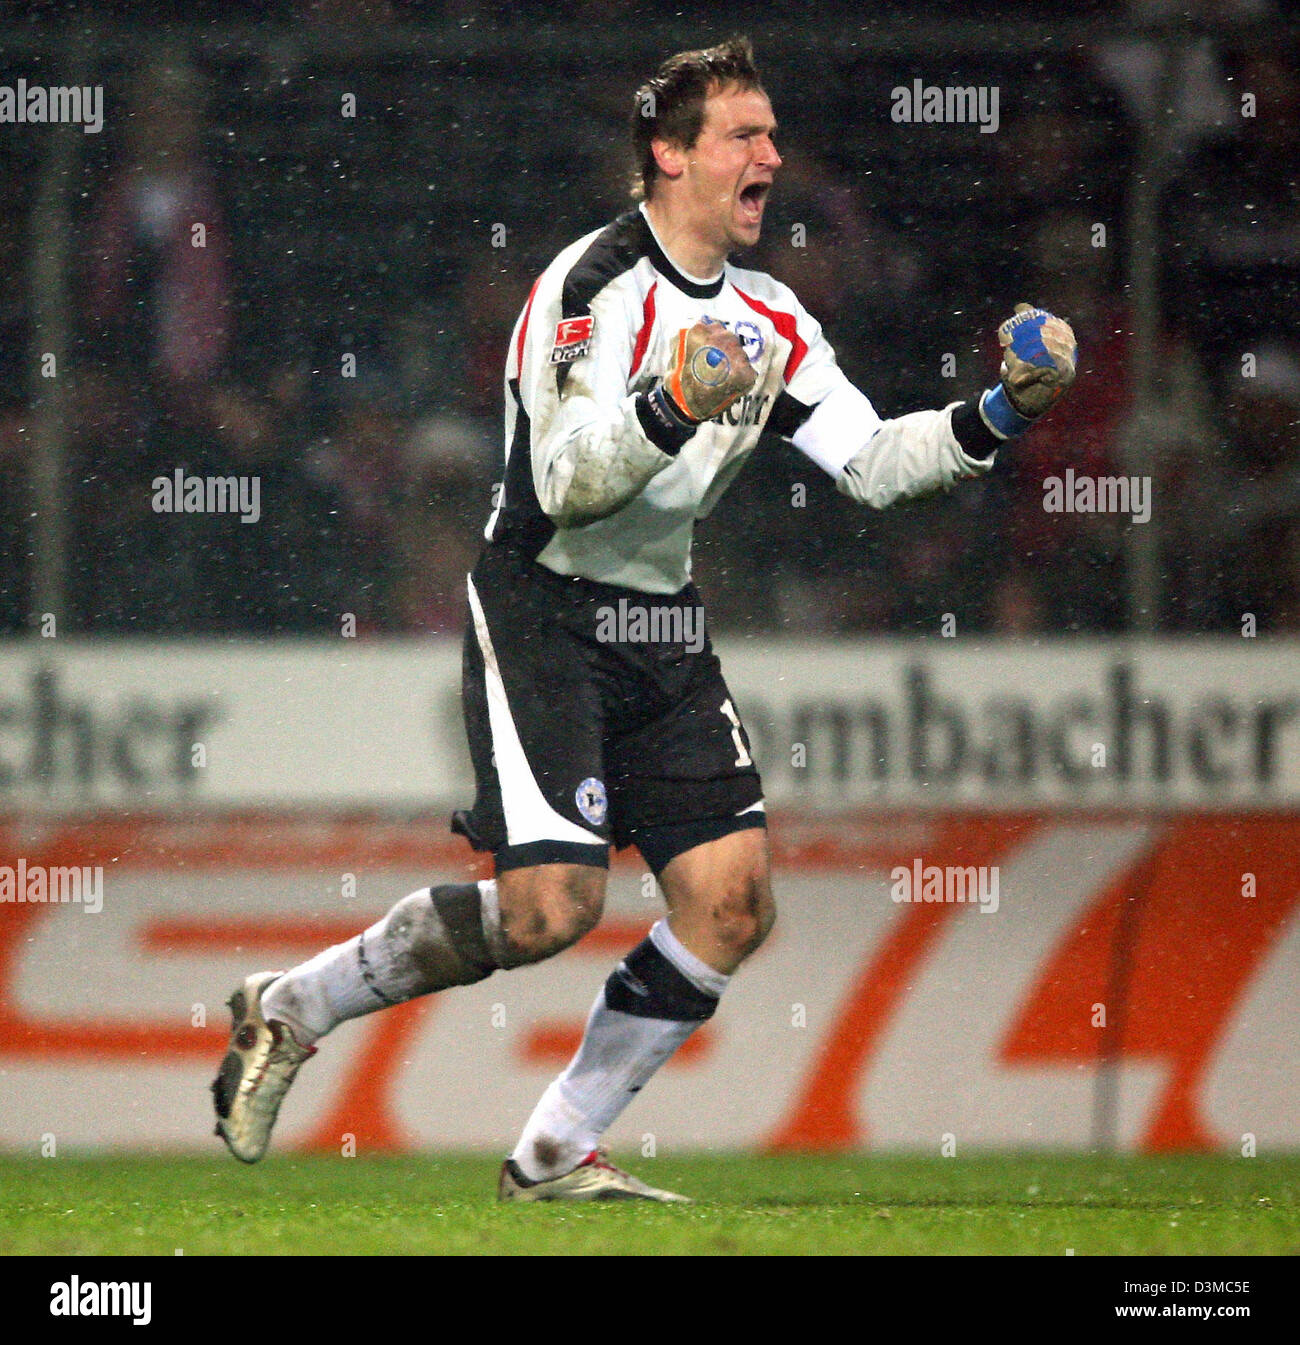 Arminia Bielefeld's goalkeeper Mathias Hain celebrates his team's triumph over Kickers Offenbach after the German Cup quarter-finals soccer match at the Schueco Arena stadium in Bielefeld, Germany, Wednesday 25 January 2006. Around12,000 spectators watched Bielefeld advance to the semi-finals after a penalty shoot-out. Photo: Franz-Peter Tschauner Stock Photo